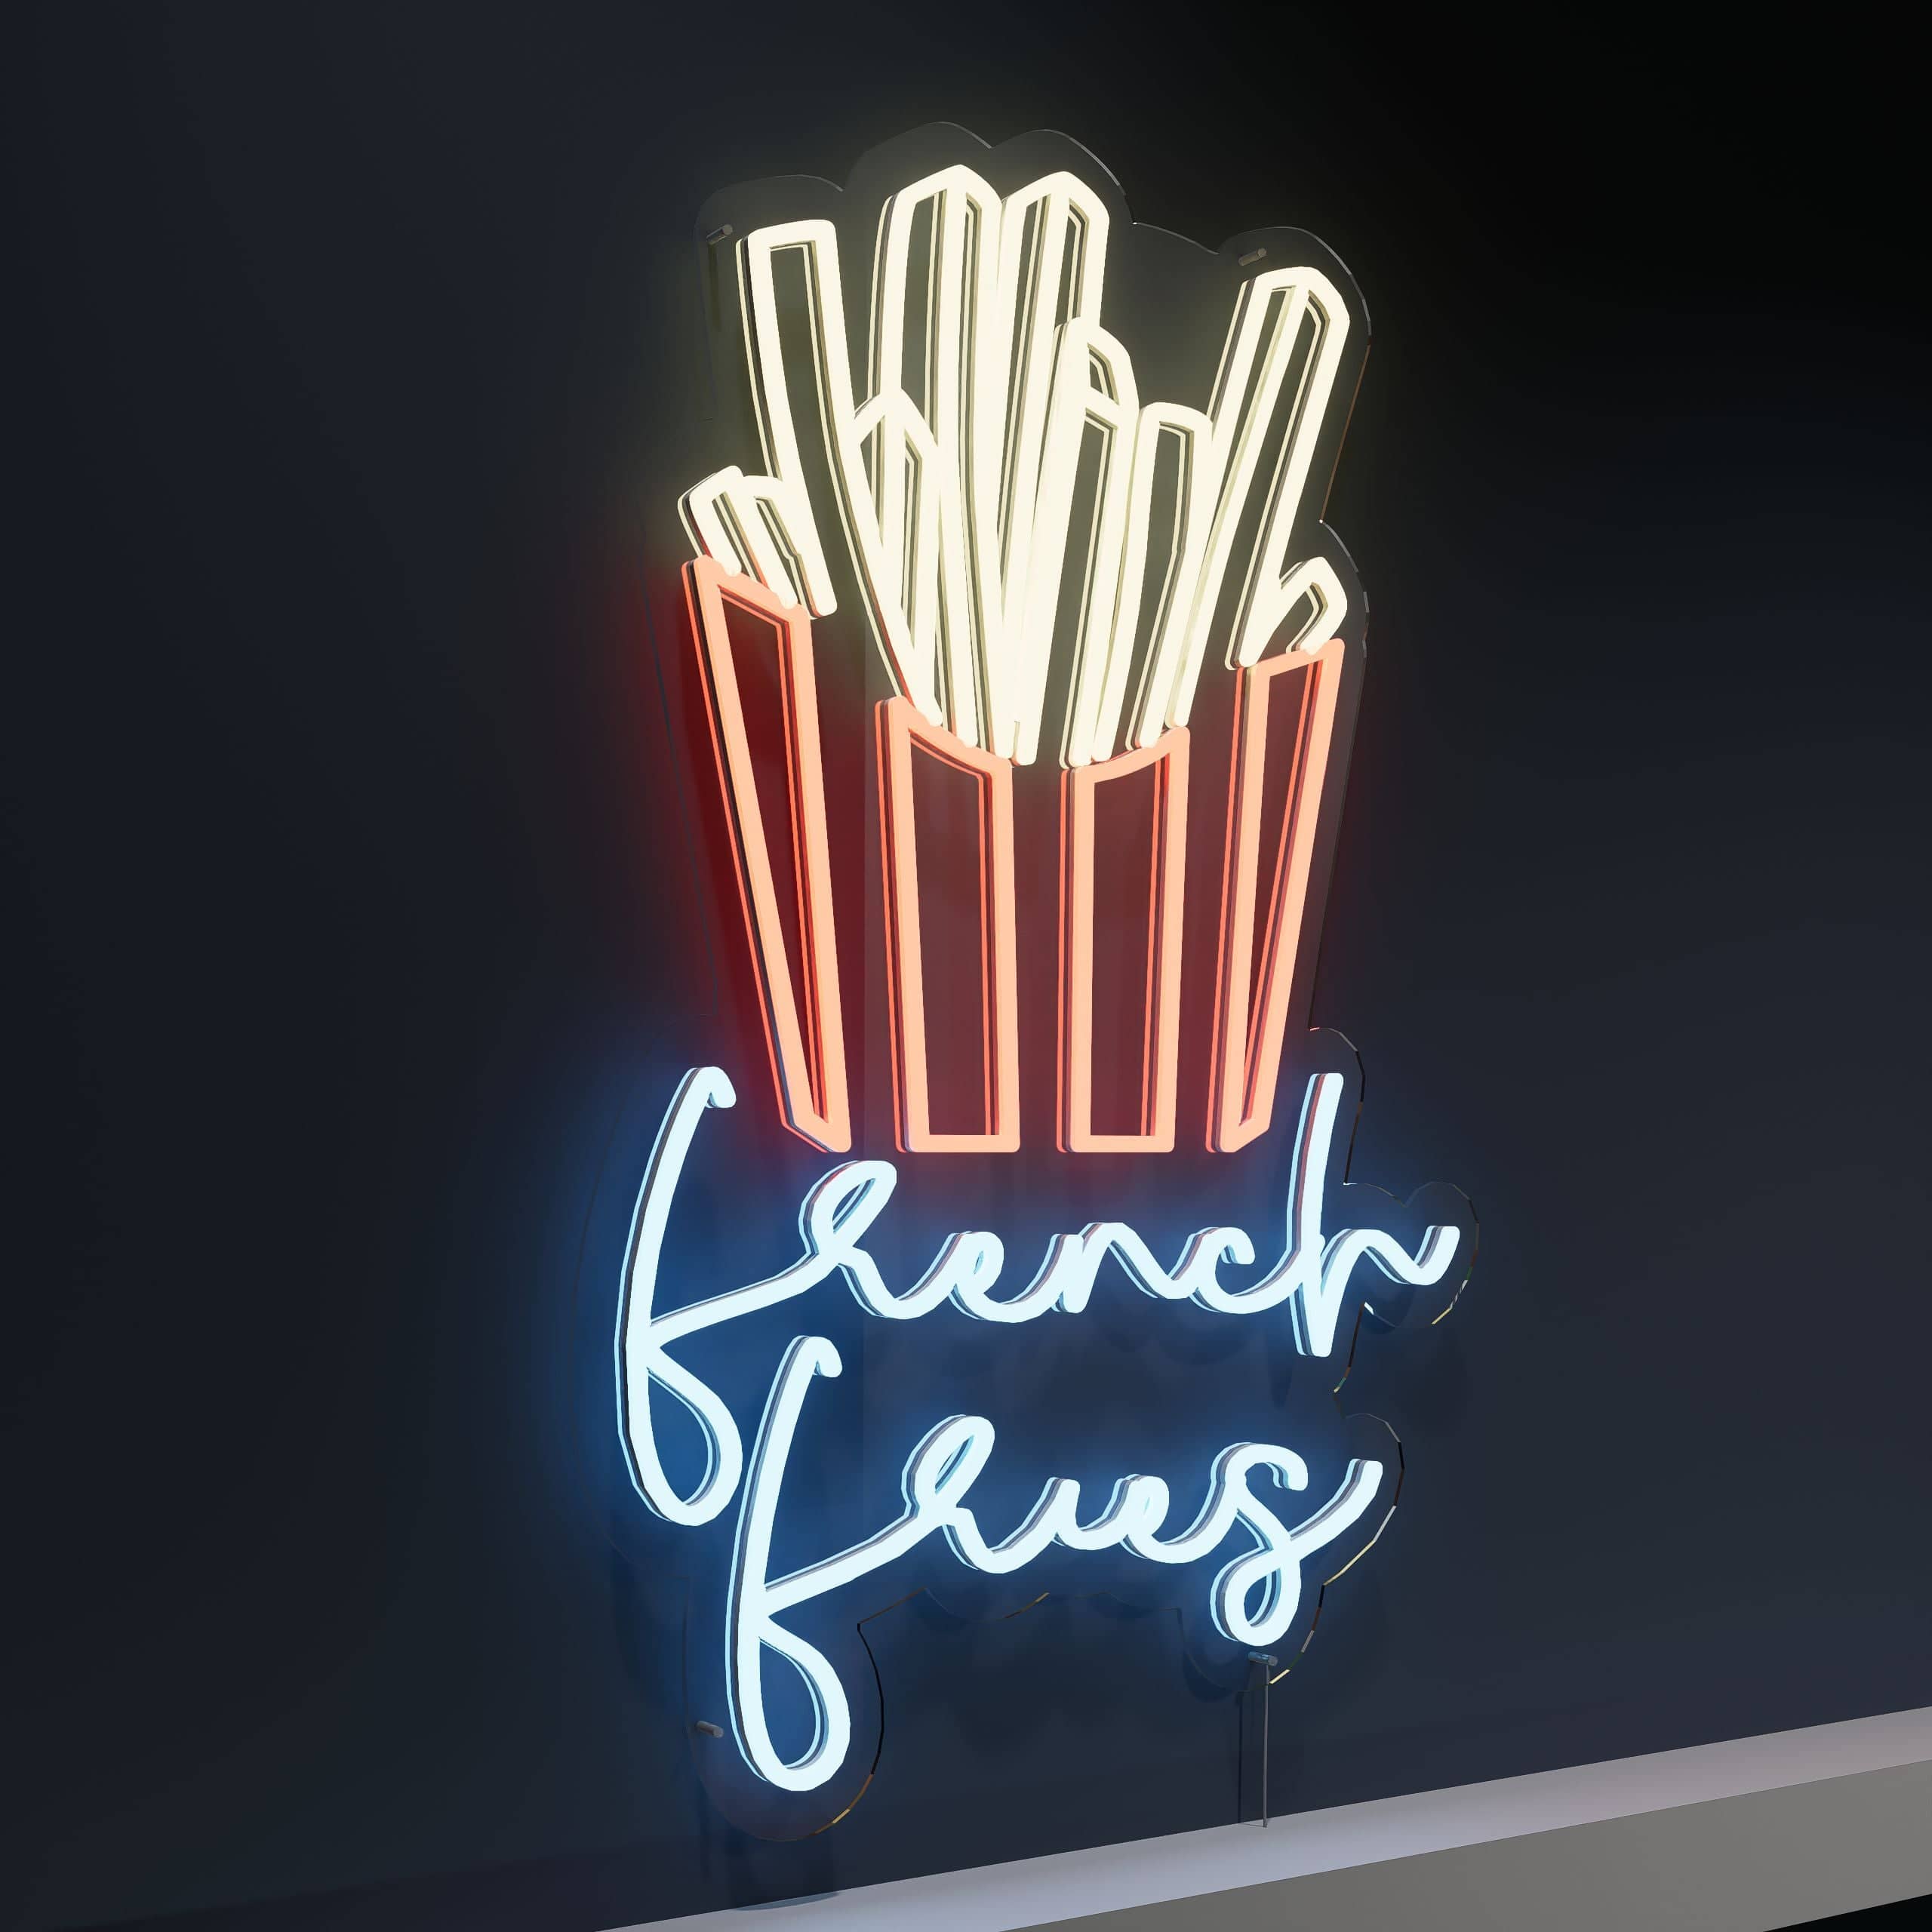 Glowing food neon sign attracts hungry customers